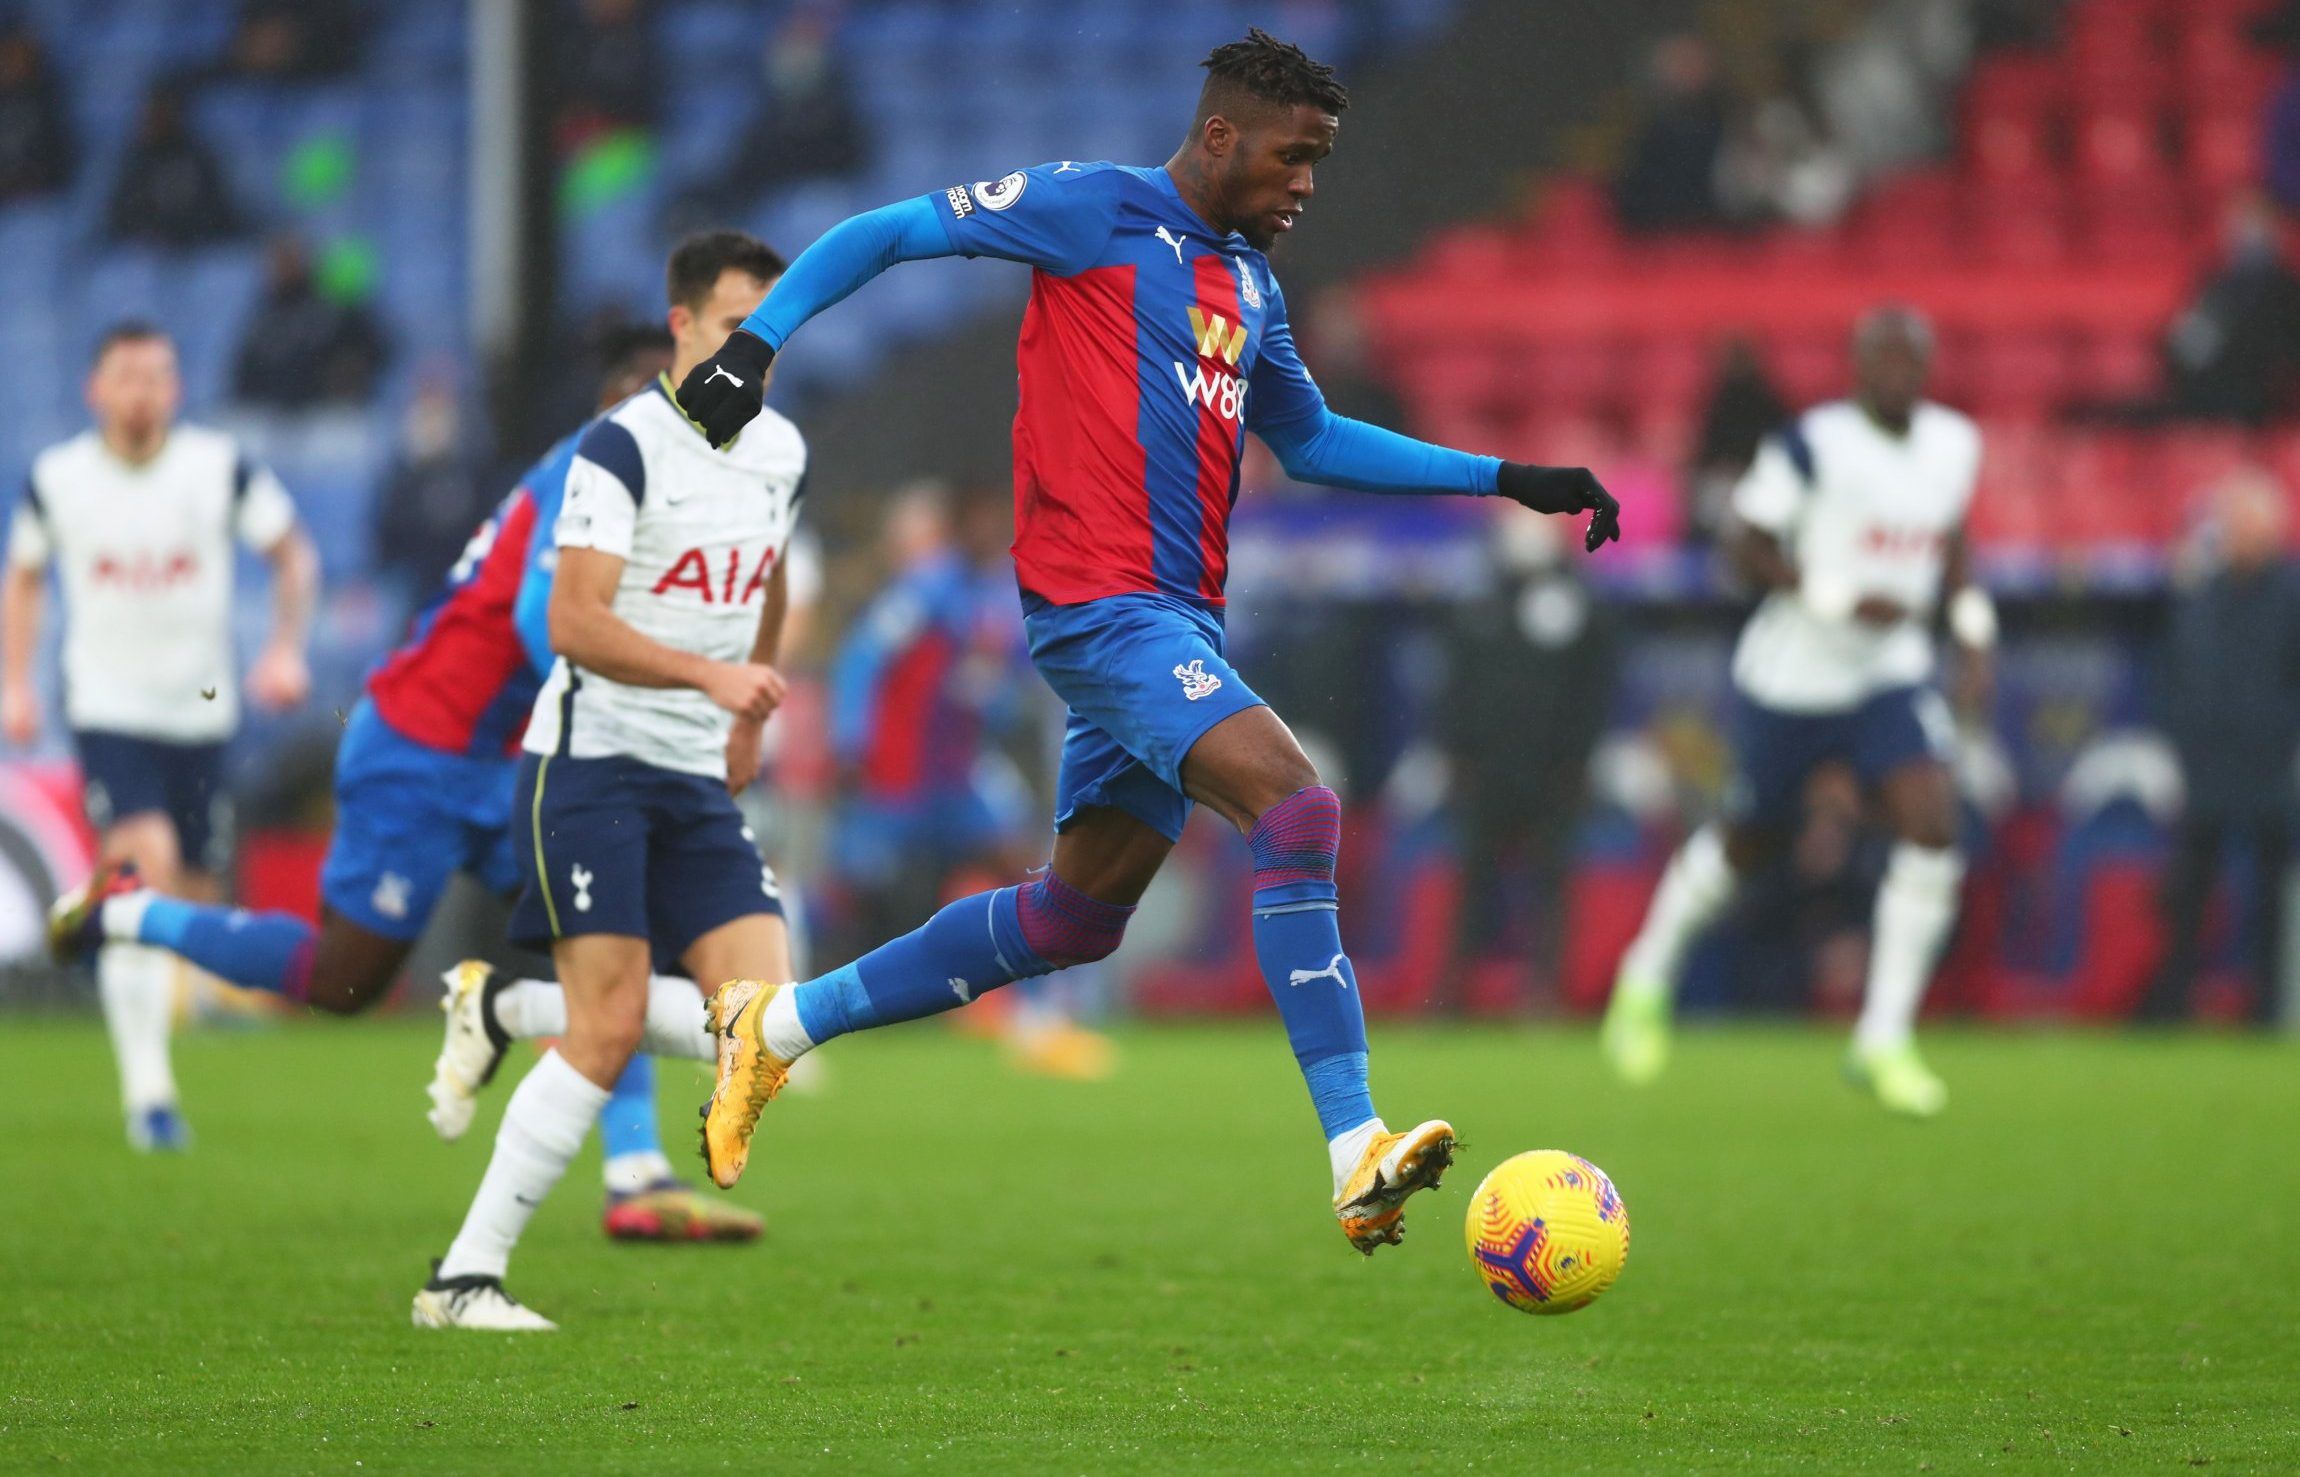 crystal palace winger wilfried zaha on the ball vs spurs premier league